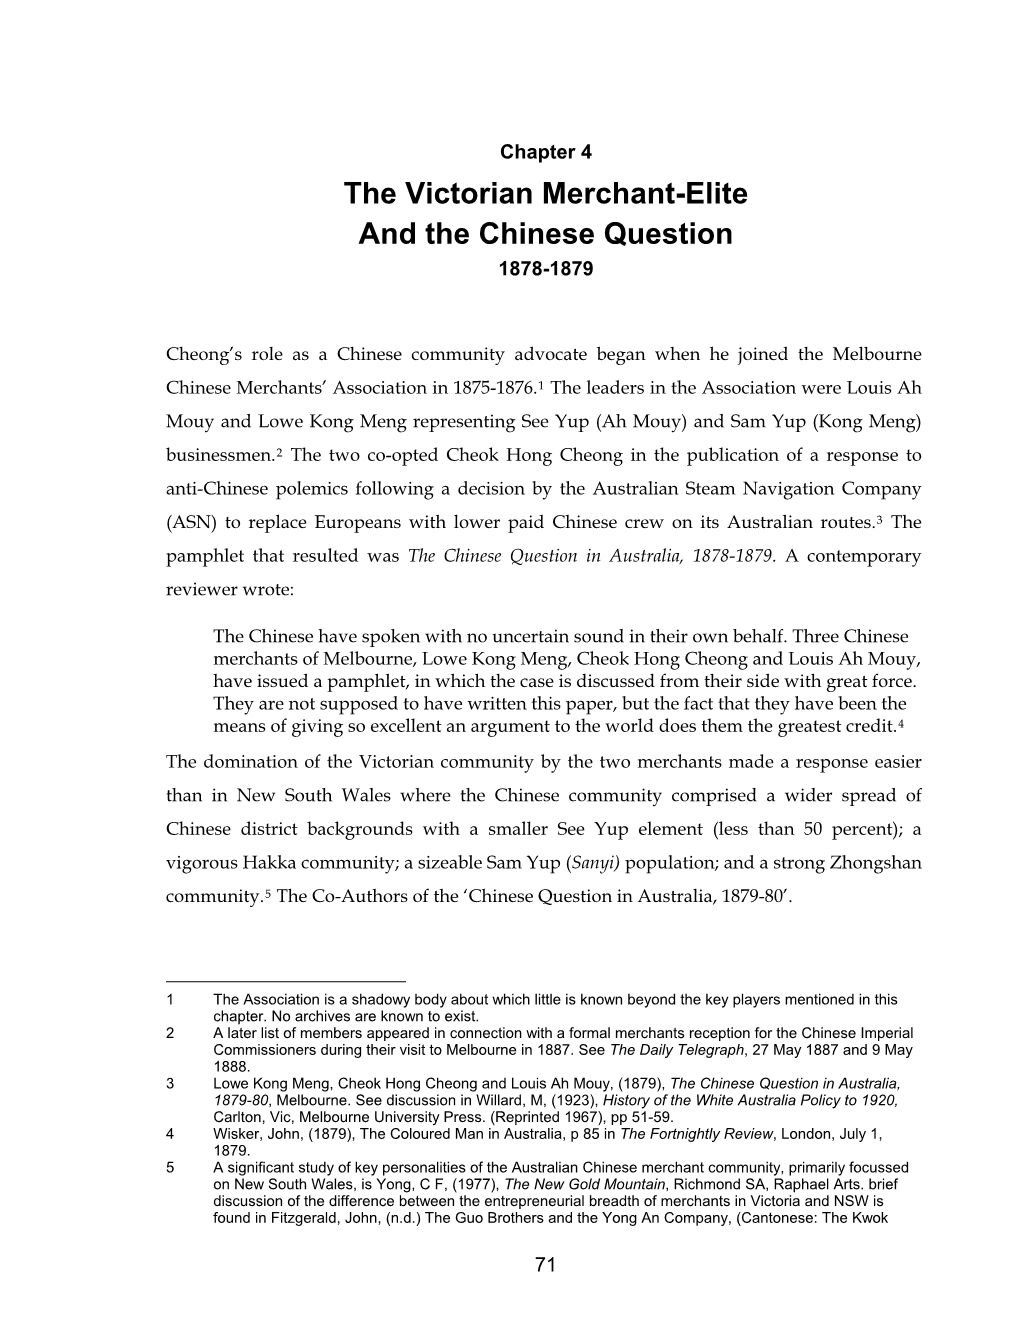 The Victorian Merchant-Elite and the Chinese Question 1878-1879